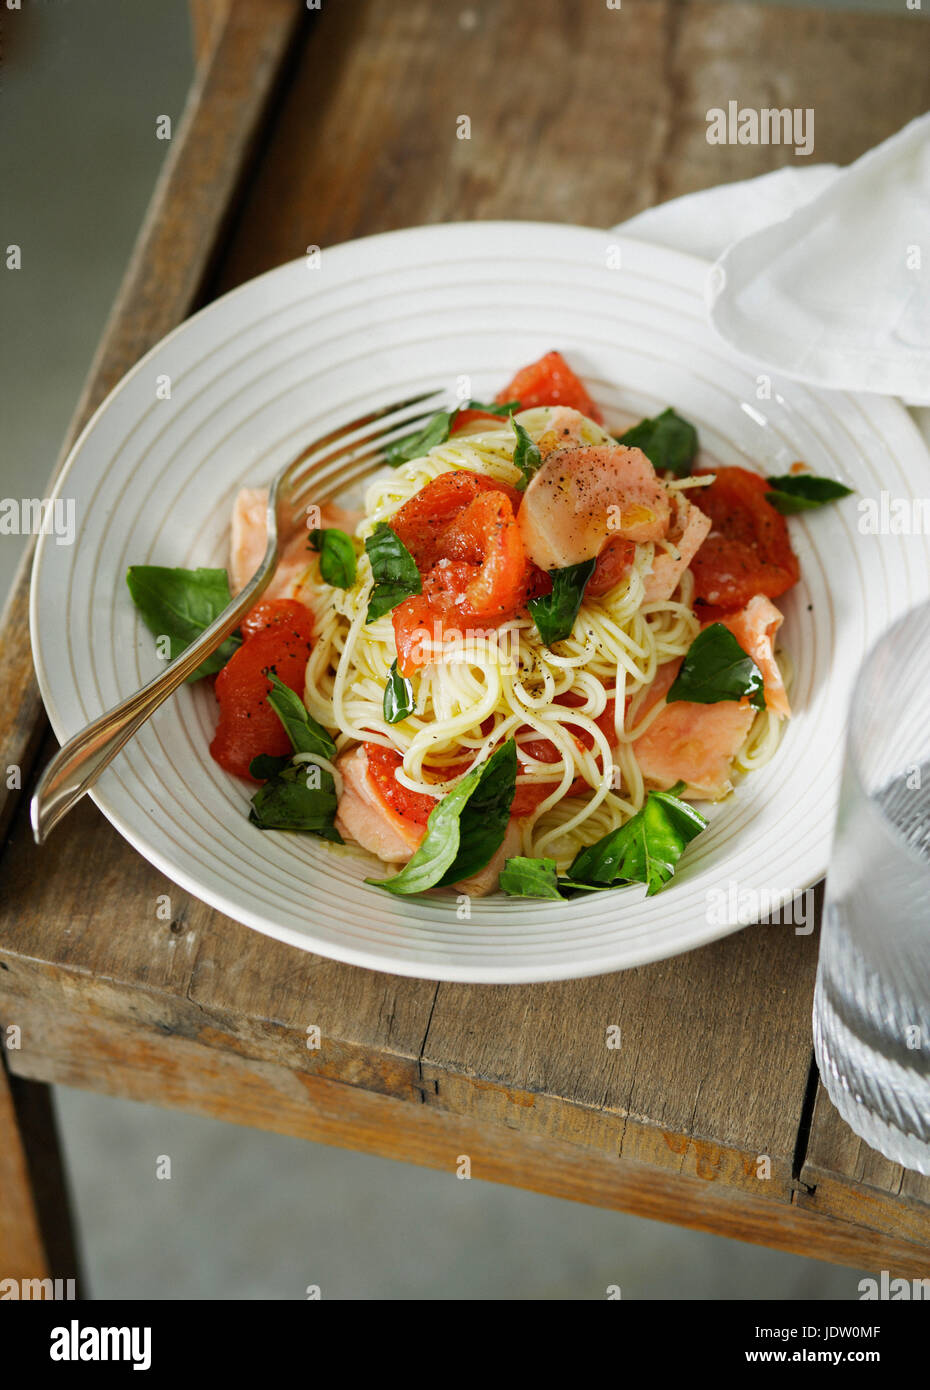 Plate of fish and tomato pasta Stock Photo